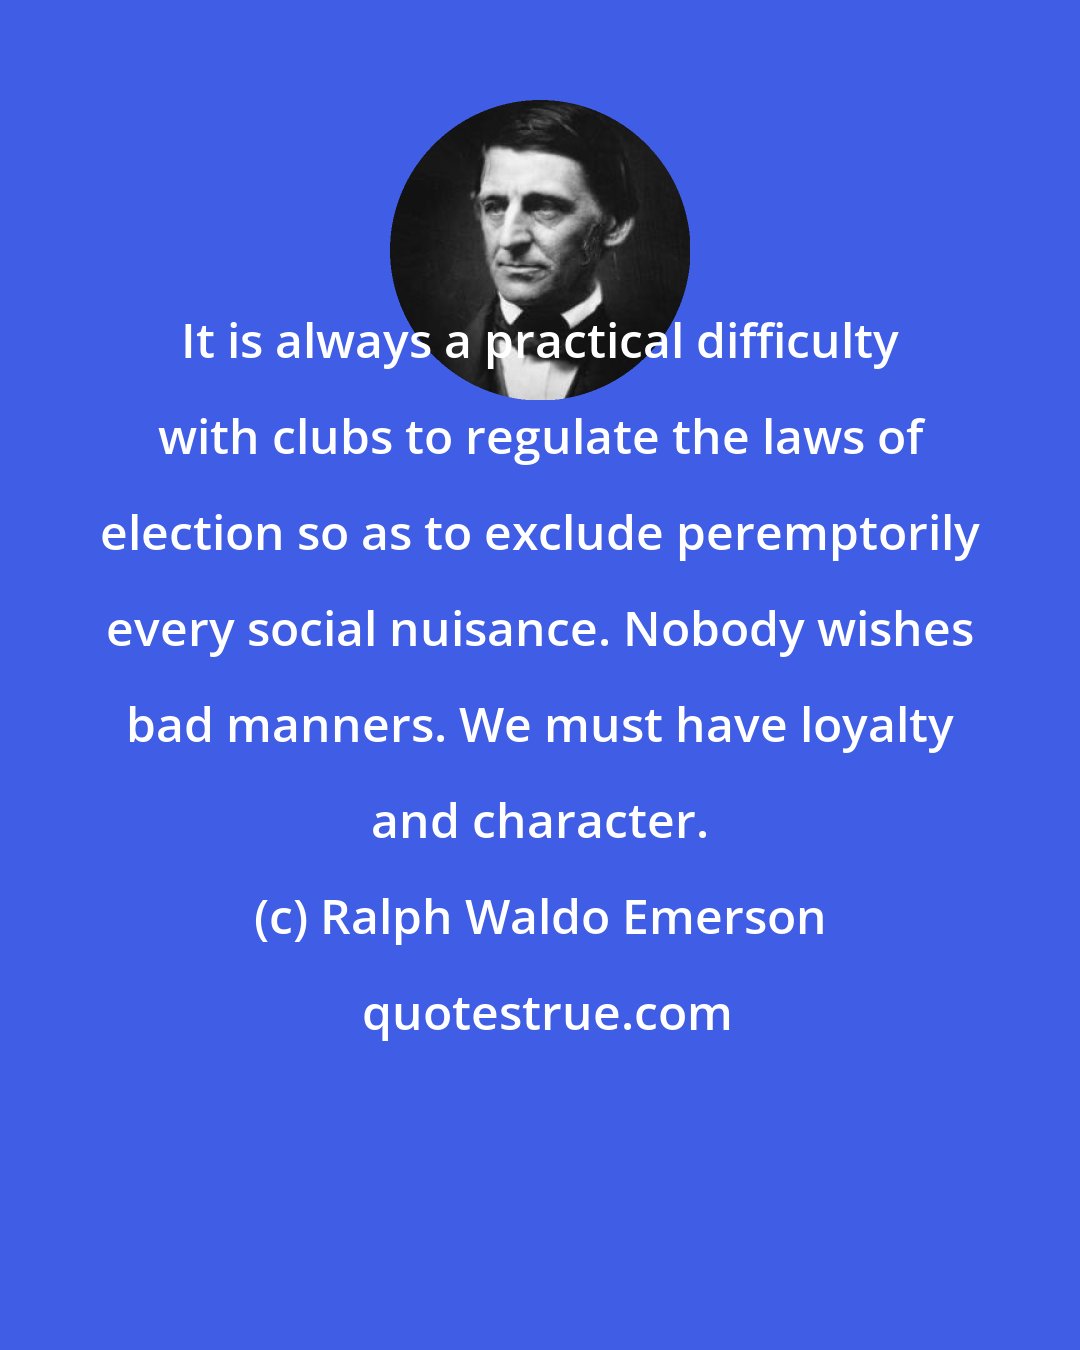 Ralph Waldo Emerson: It is always a practical difficulty with clubs to regulate the laws of election so as to exclude peremptorily every social nuisance. Nobody wishes bad manners. We must have loyalty and character.